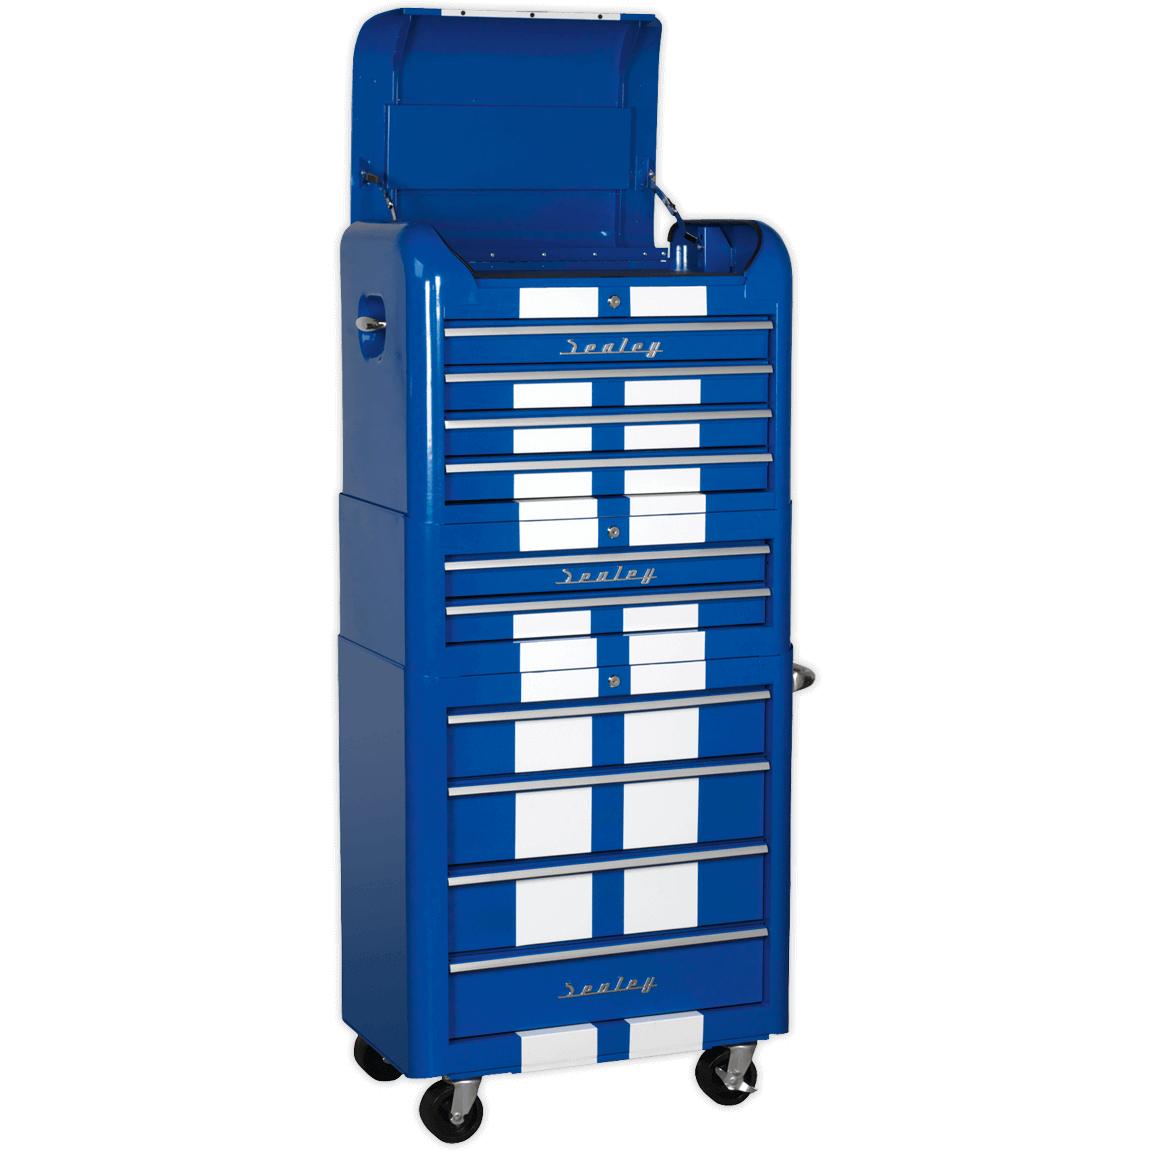 Sealey Premier Retro Style 10 Drawer Roller Cabinet, Mid and Top Tool Chest Blue / White